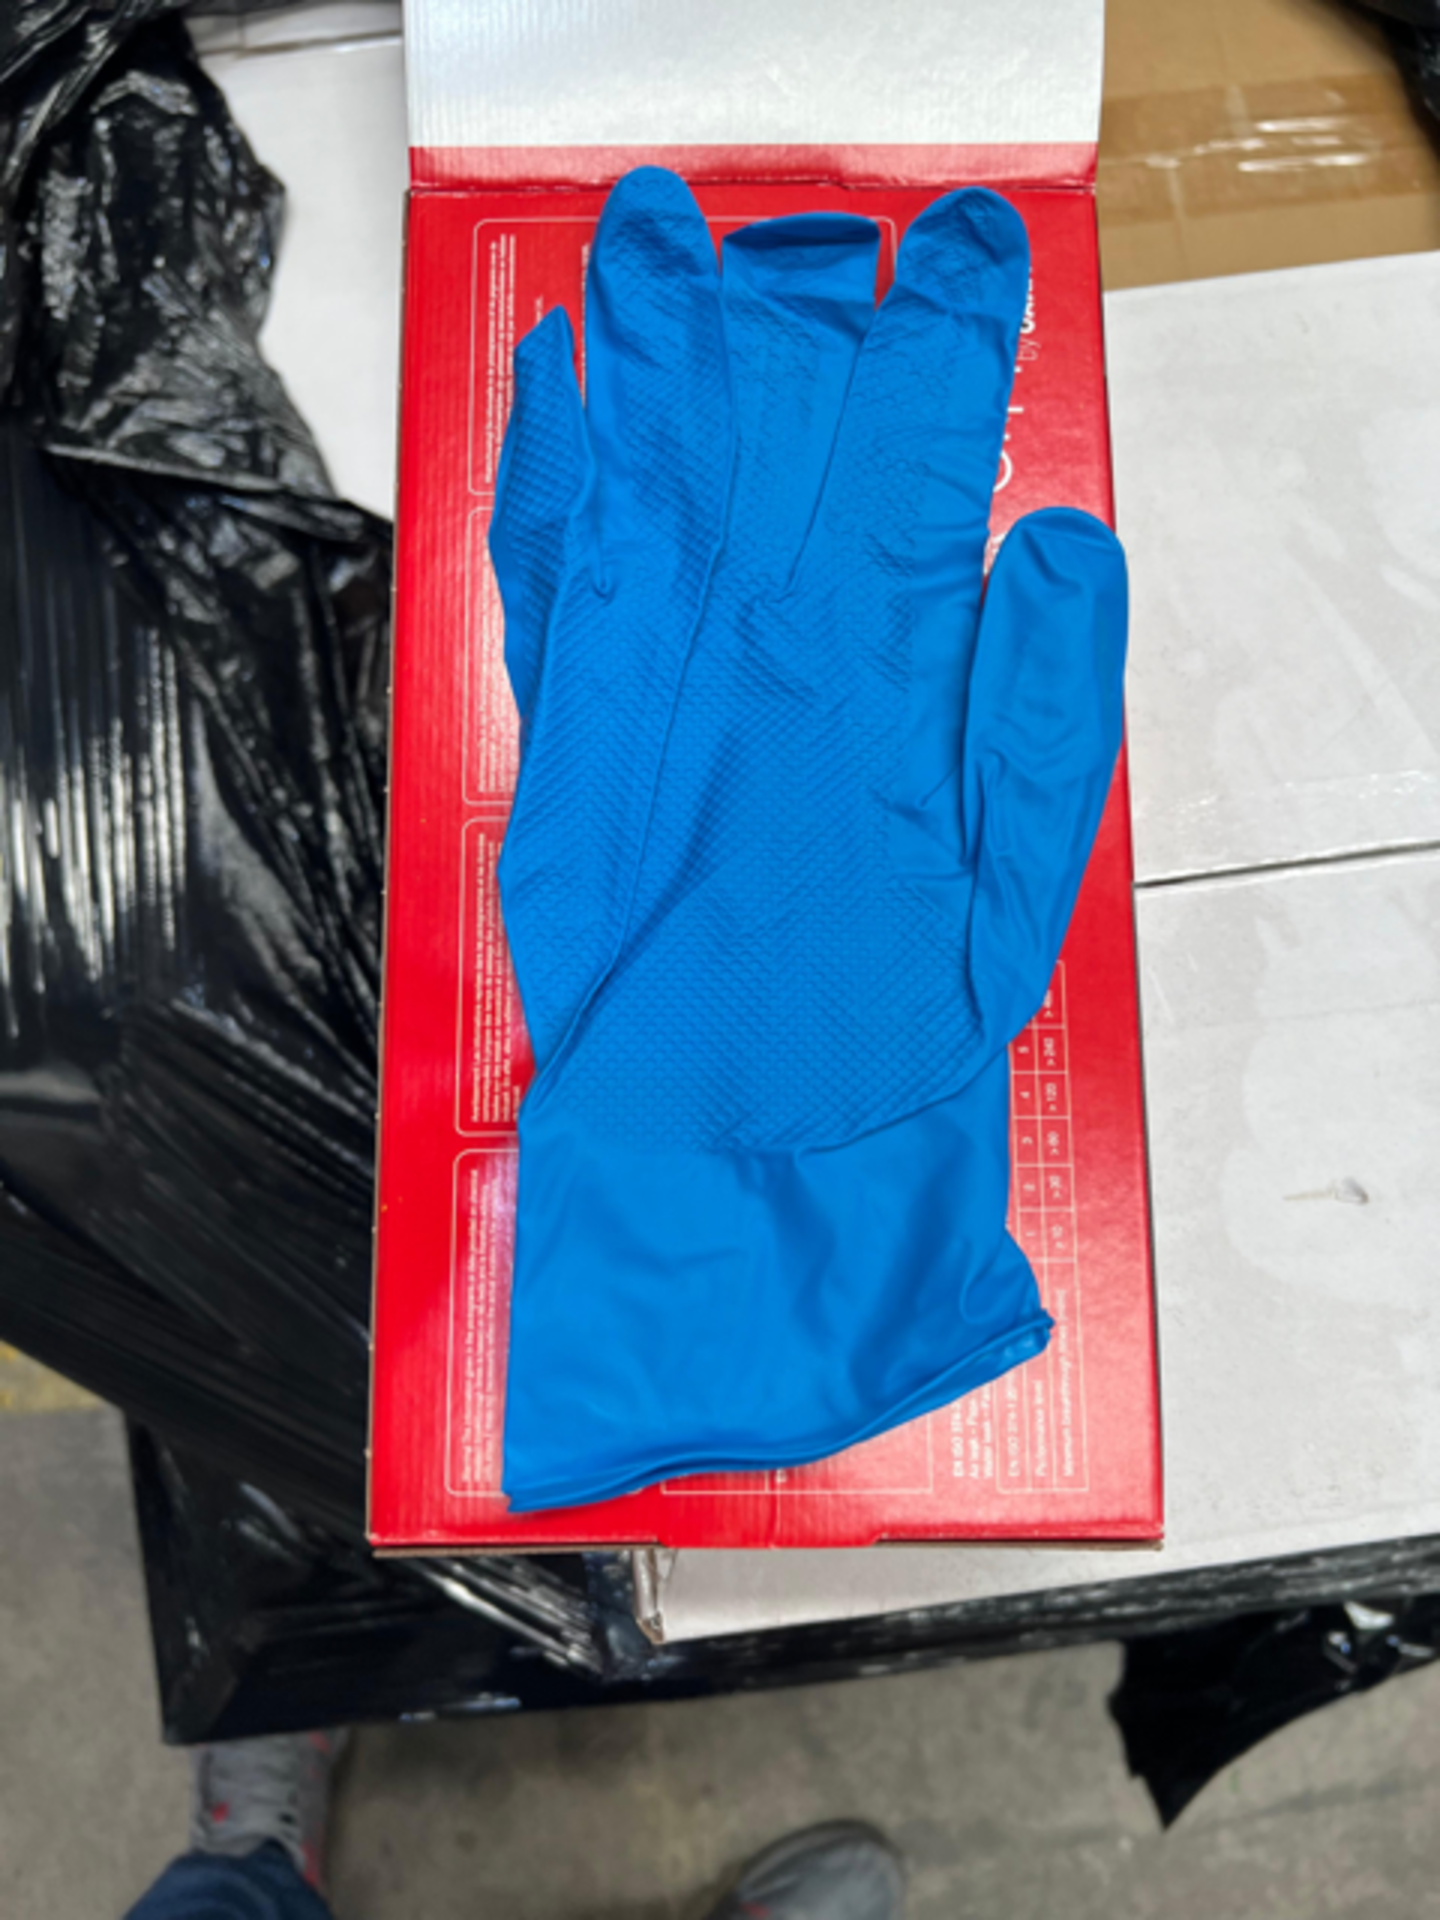 600 X BRAND NEW PACKS OF 50 GRIPPAZ Z PRO BLUE SANITISING EXAMINATION GLOVES SIZE SMALL EXP OCT - Image 4 of 5